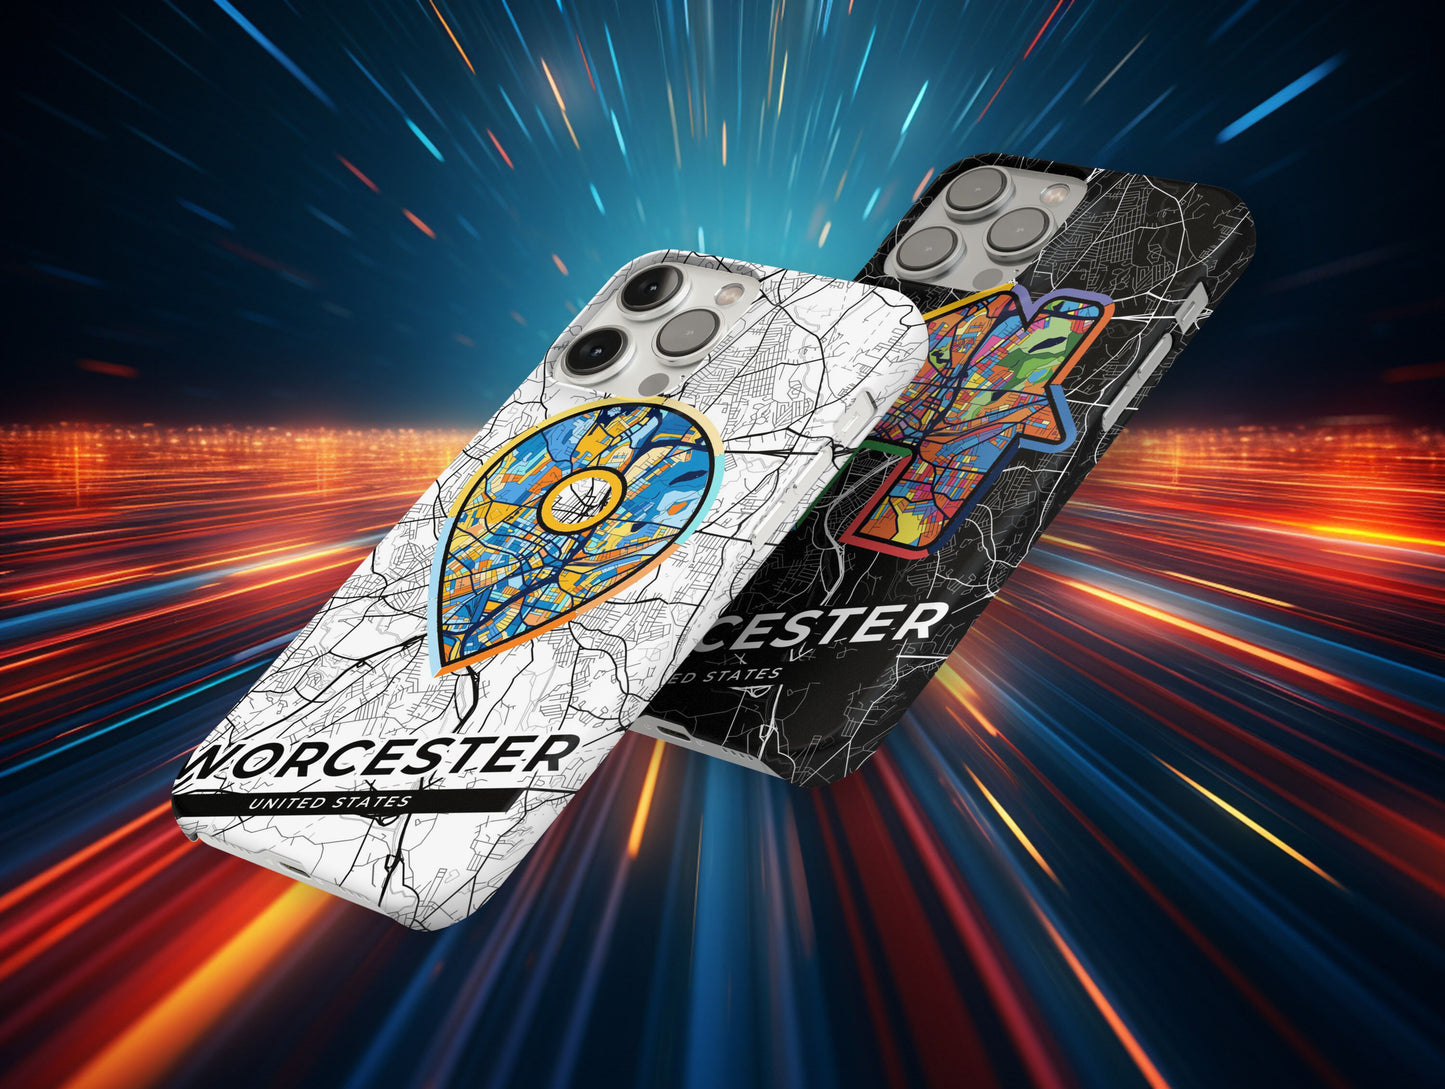 Worcester Massachusetts slim phone case with colorful icon